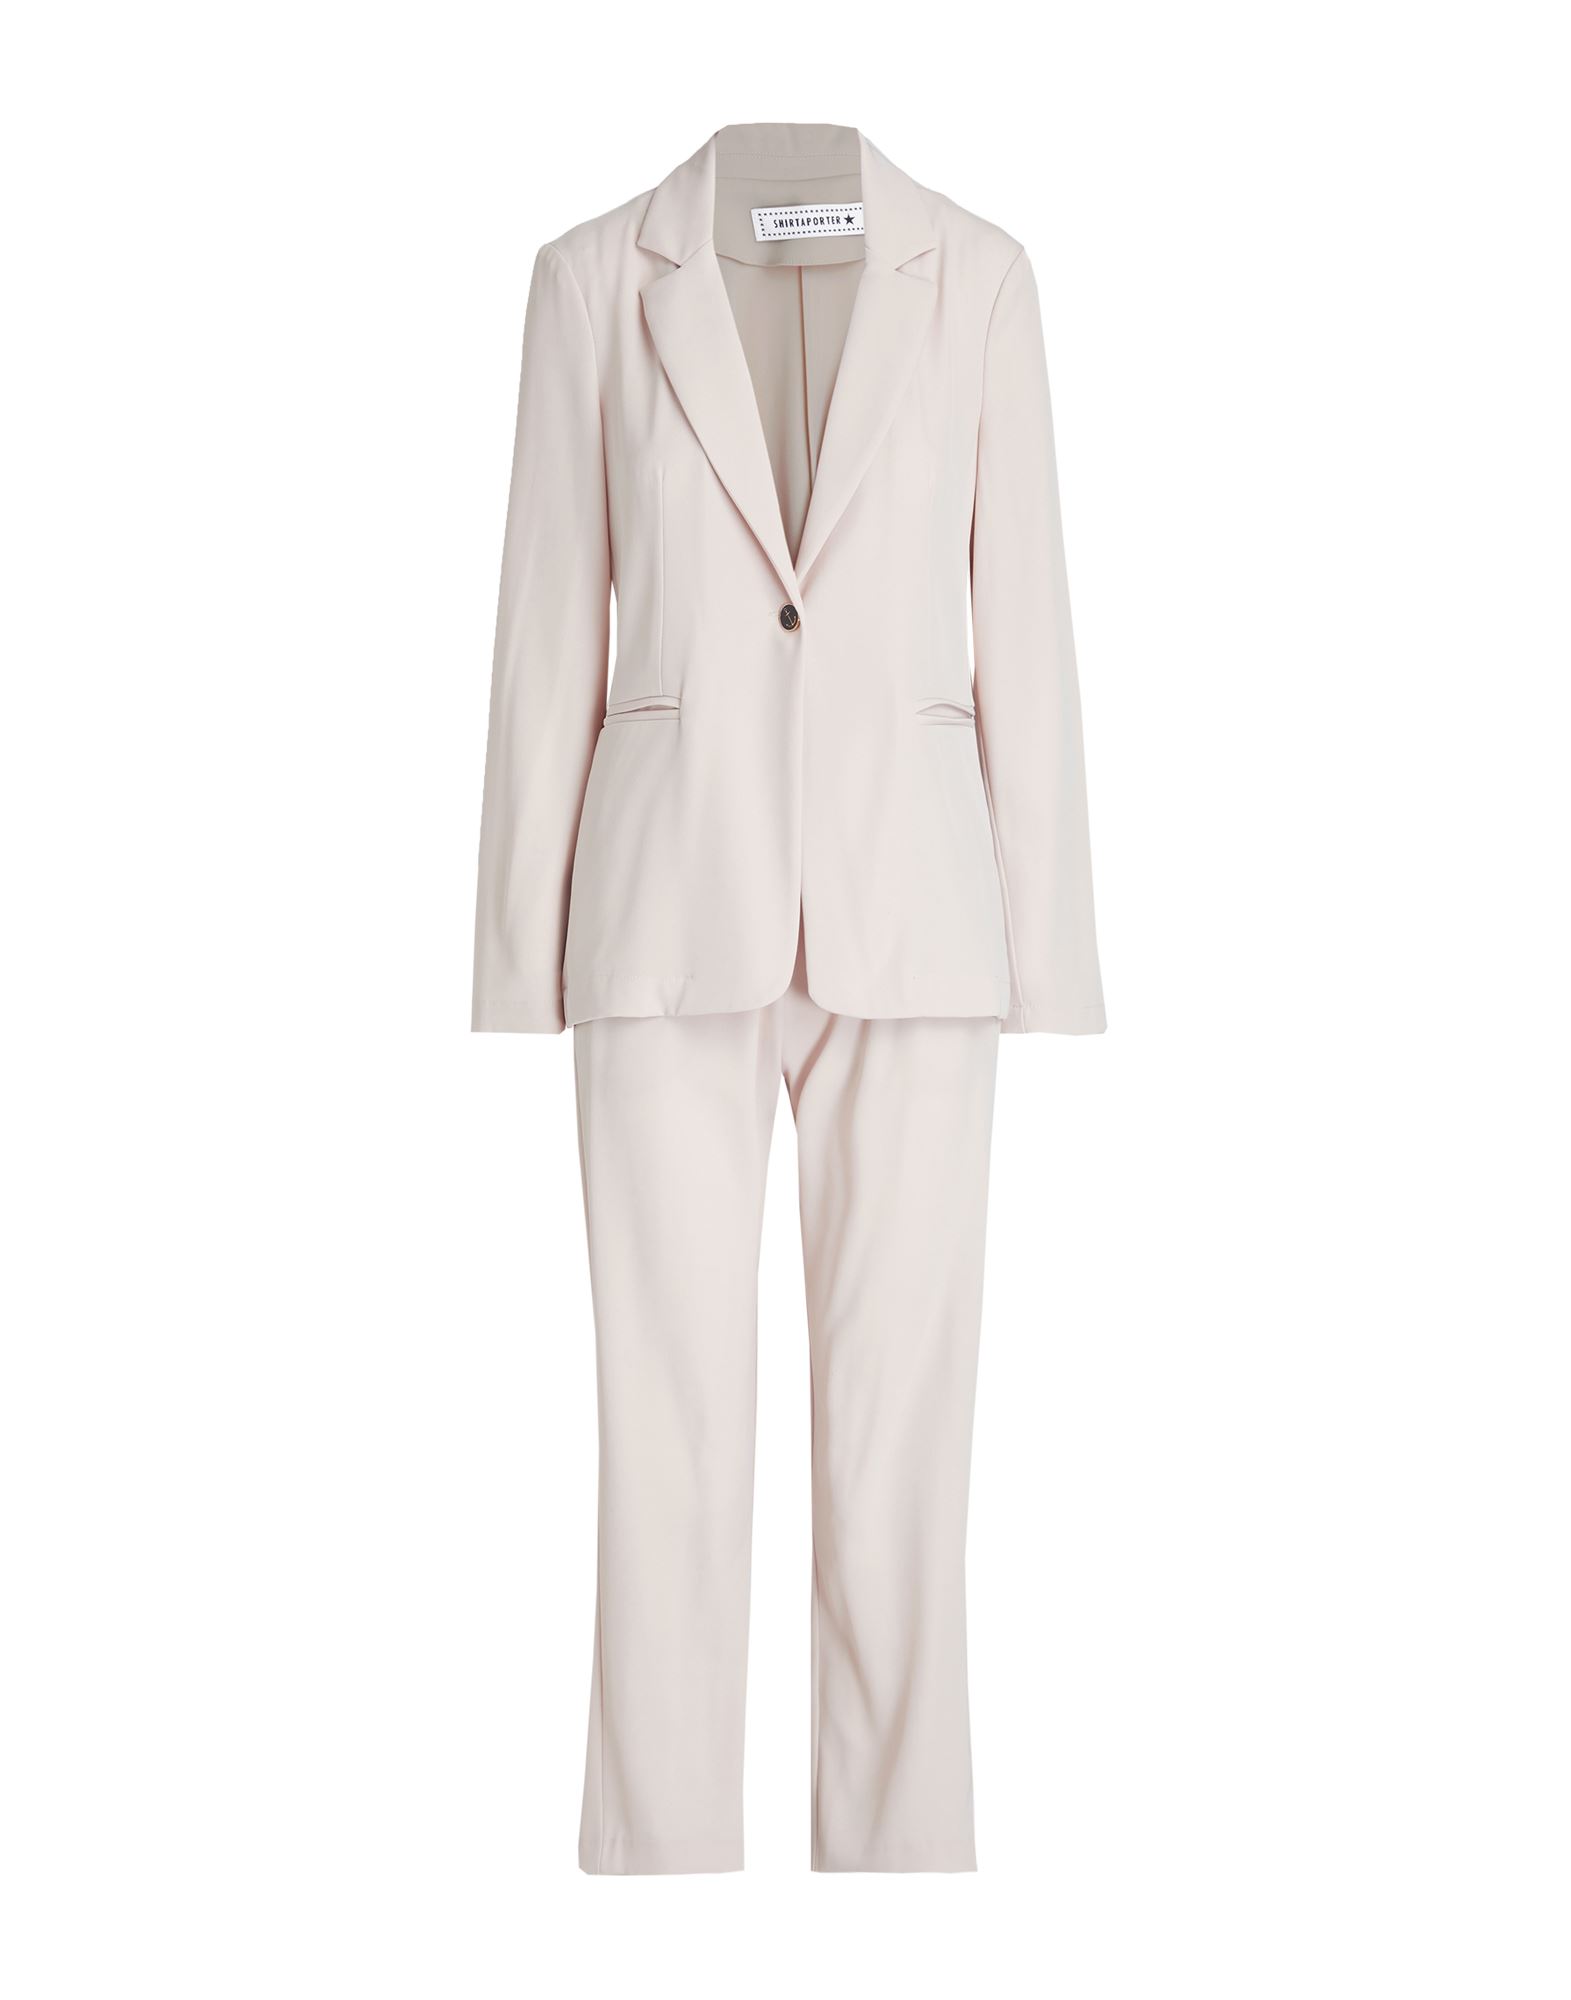 Shirtaporter Suits In Beige